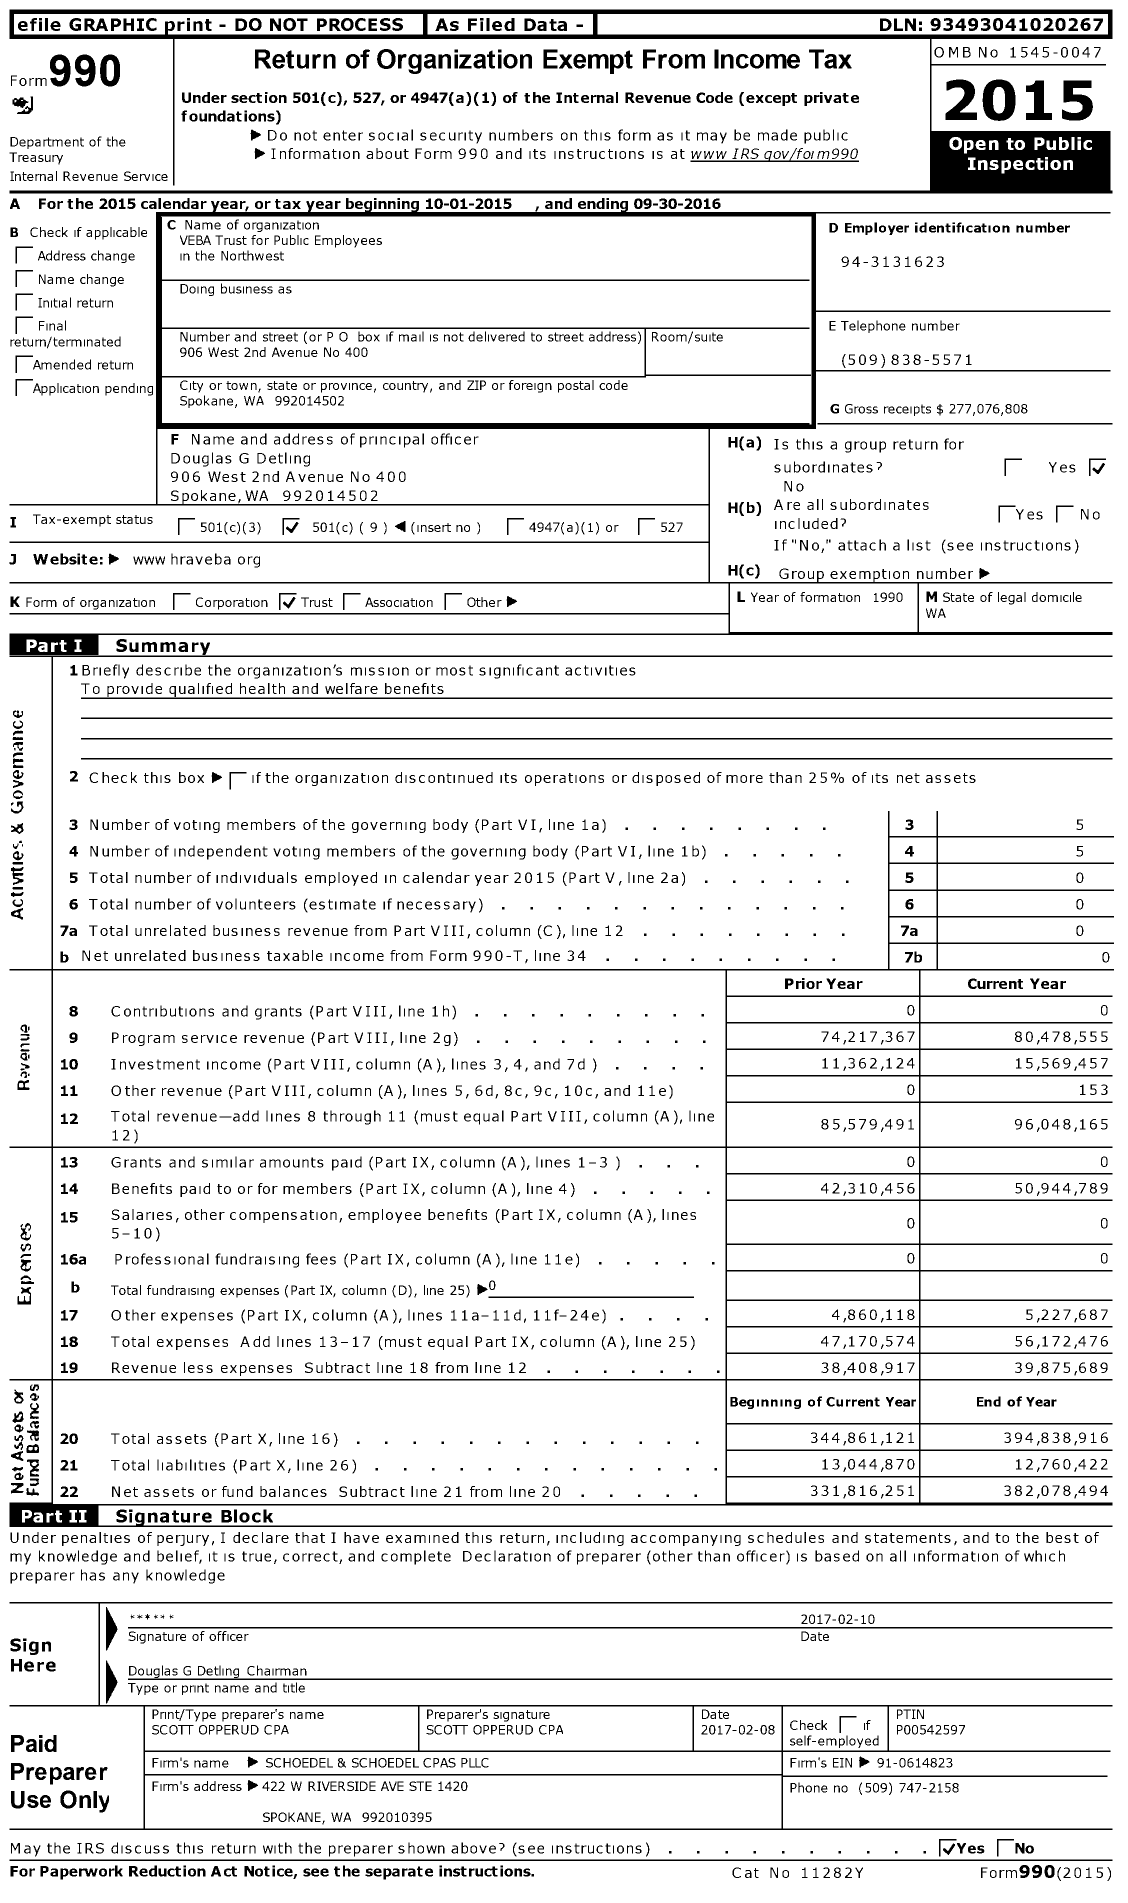 Image of first page of 2015 Form 990O for VEBA Trust for Public Employees in the Northwest